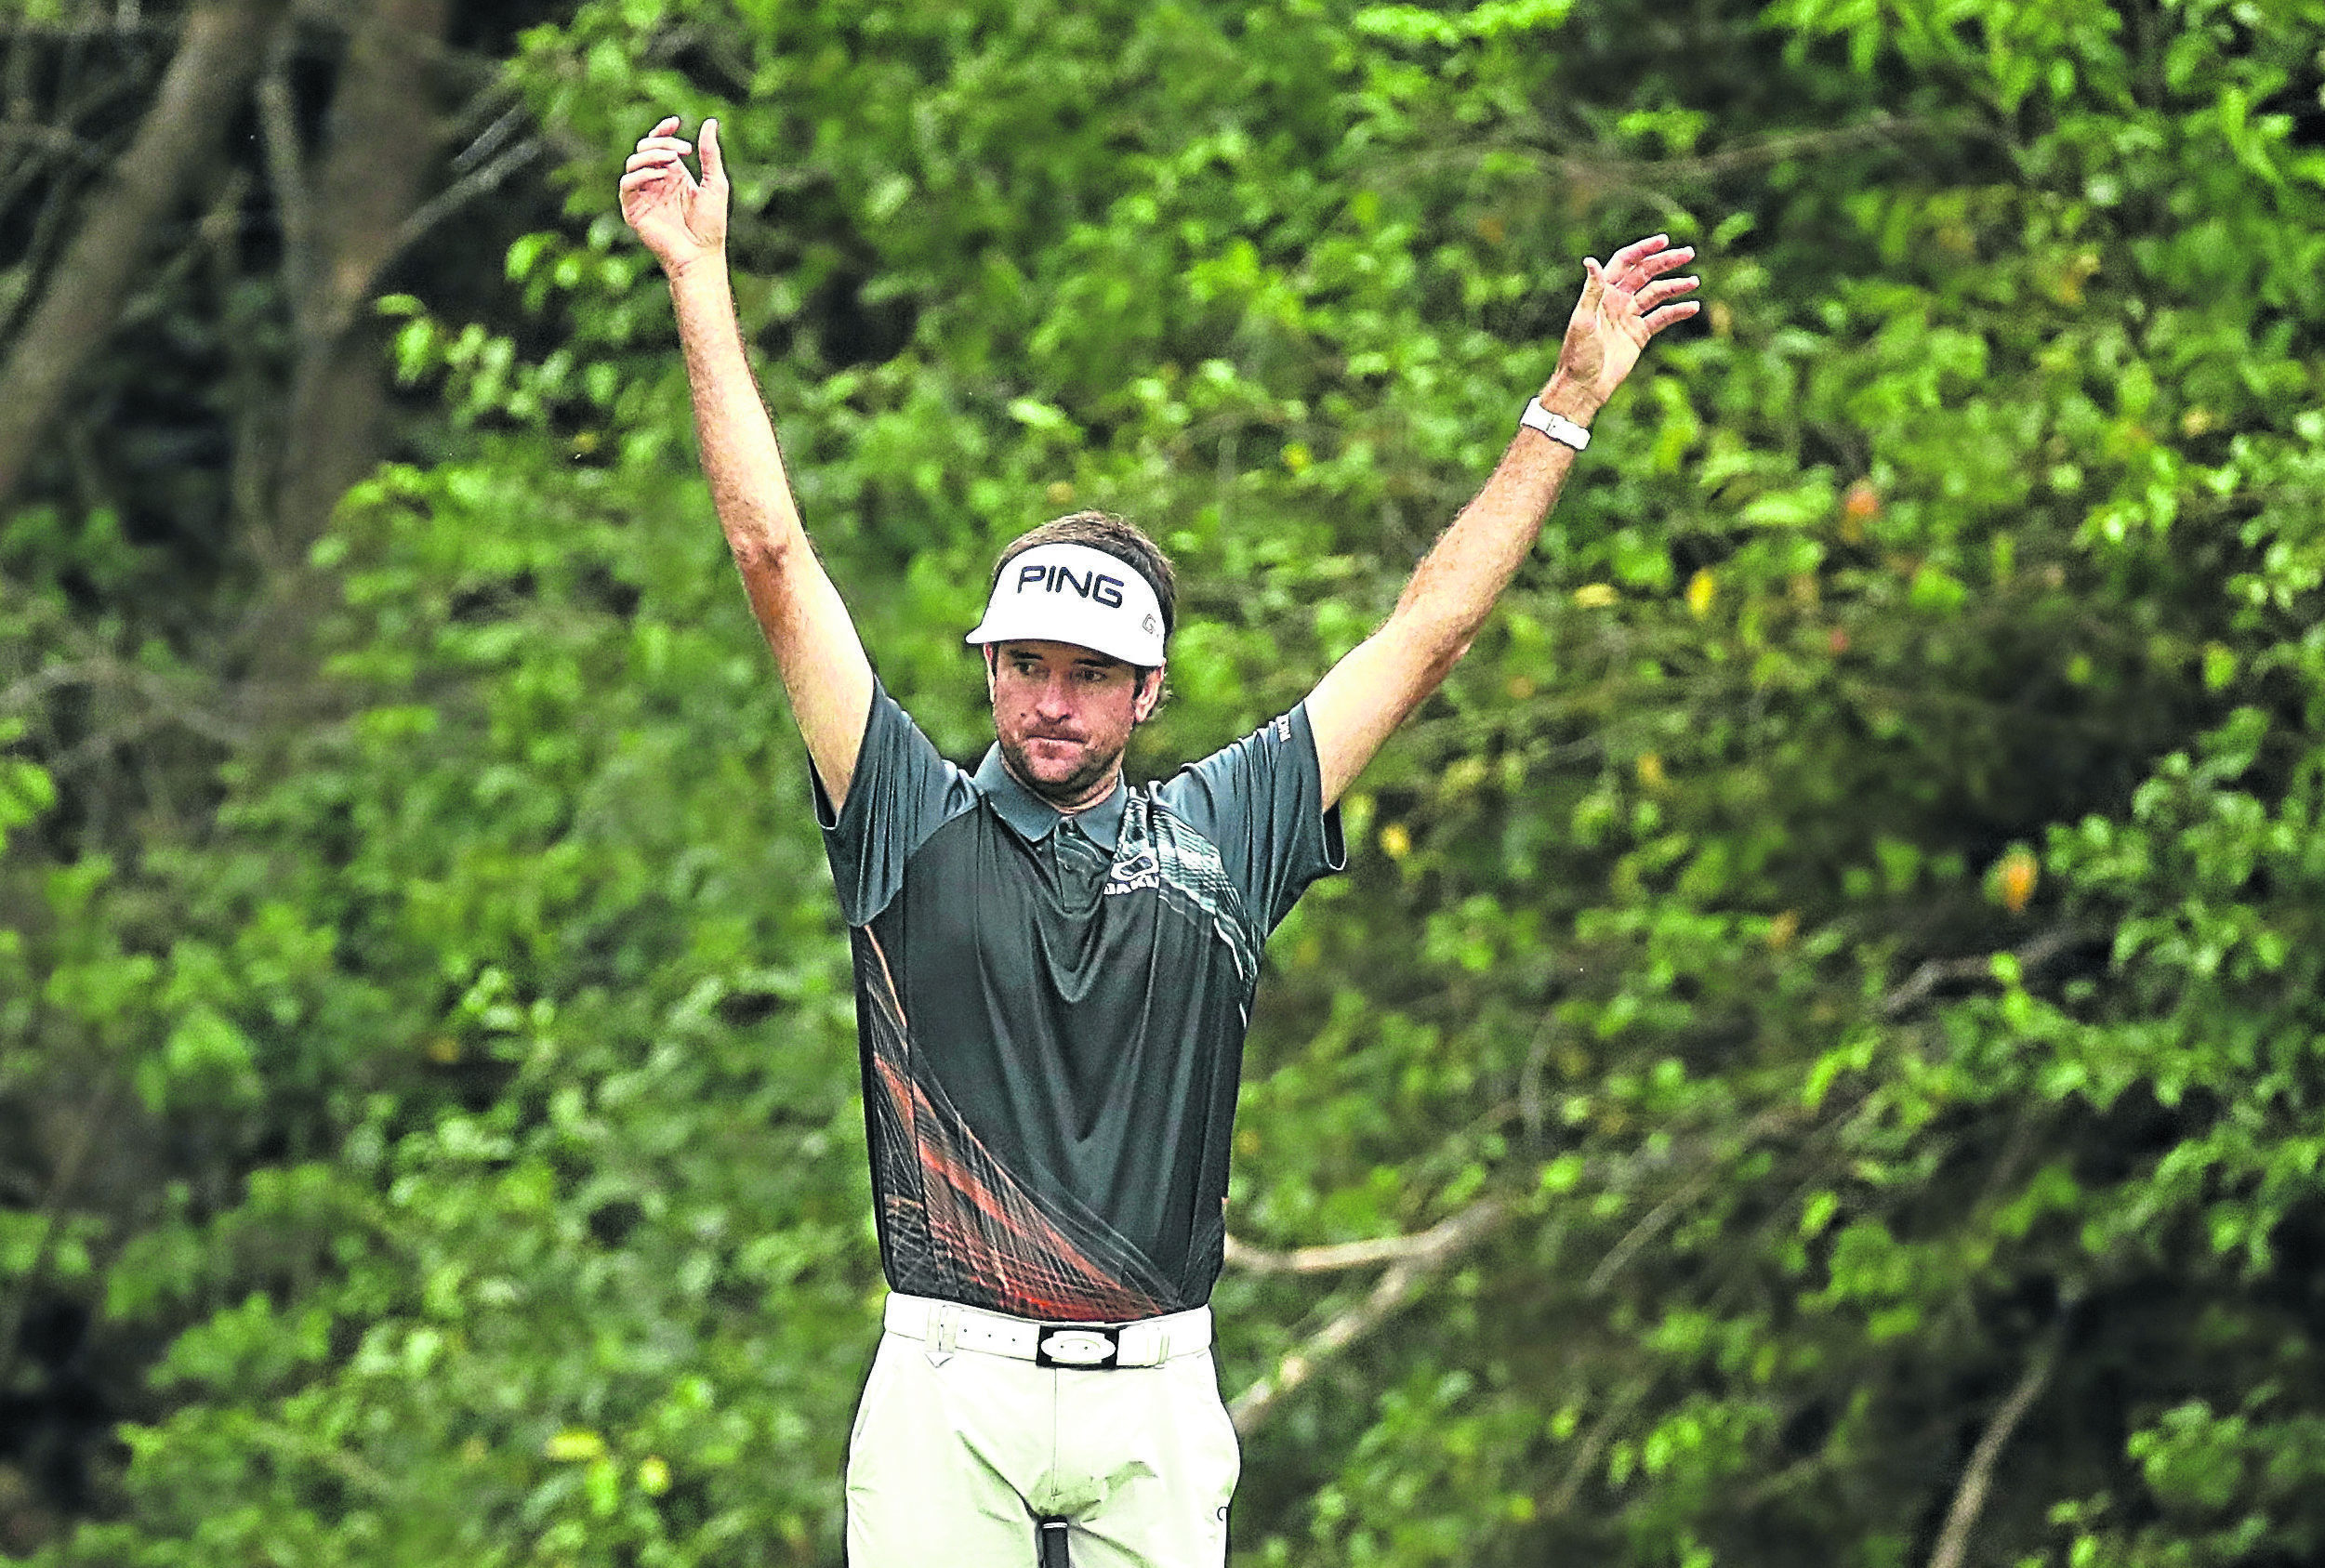 Bubba Watson of the United States reacts on the third green during his final round match against Kevin Kisner of the United States in the World Golf Championships-Dell Match Play at Austin Country Club on March 25, 2018 in Austin, Texas.